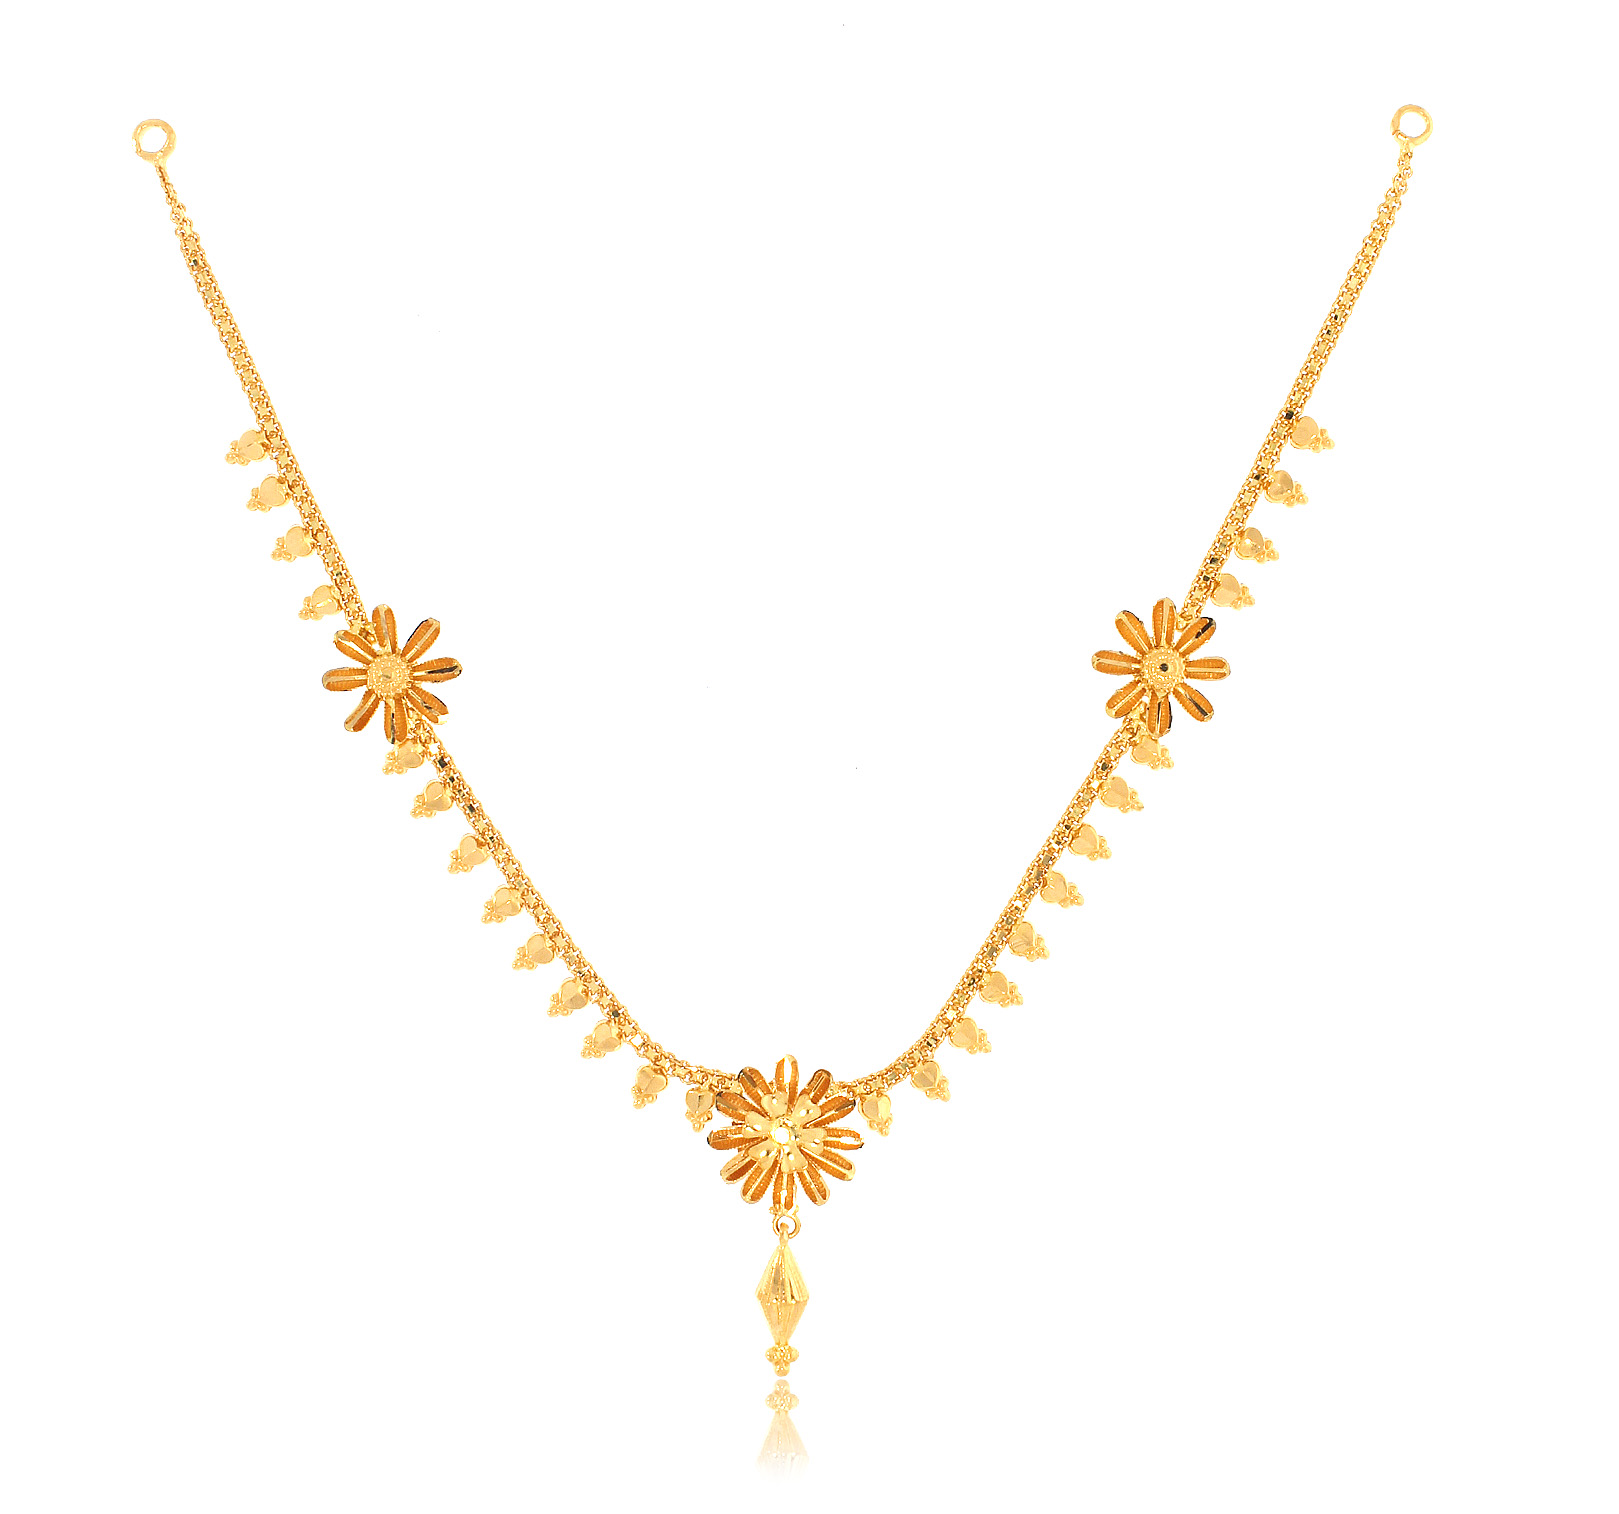 SUBH AABI JEWELS 22CT  BIS HALLMARK  GOLD NECKLACE FOR  WOMEN